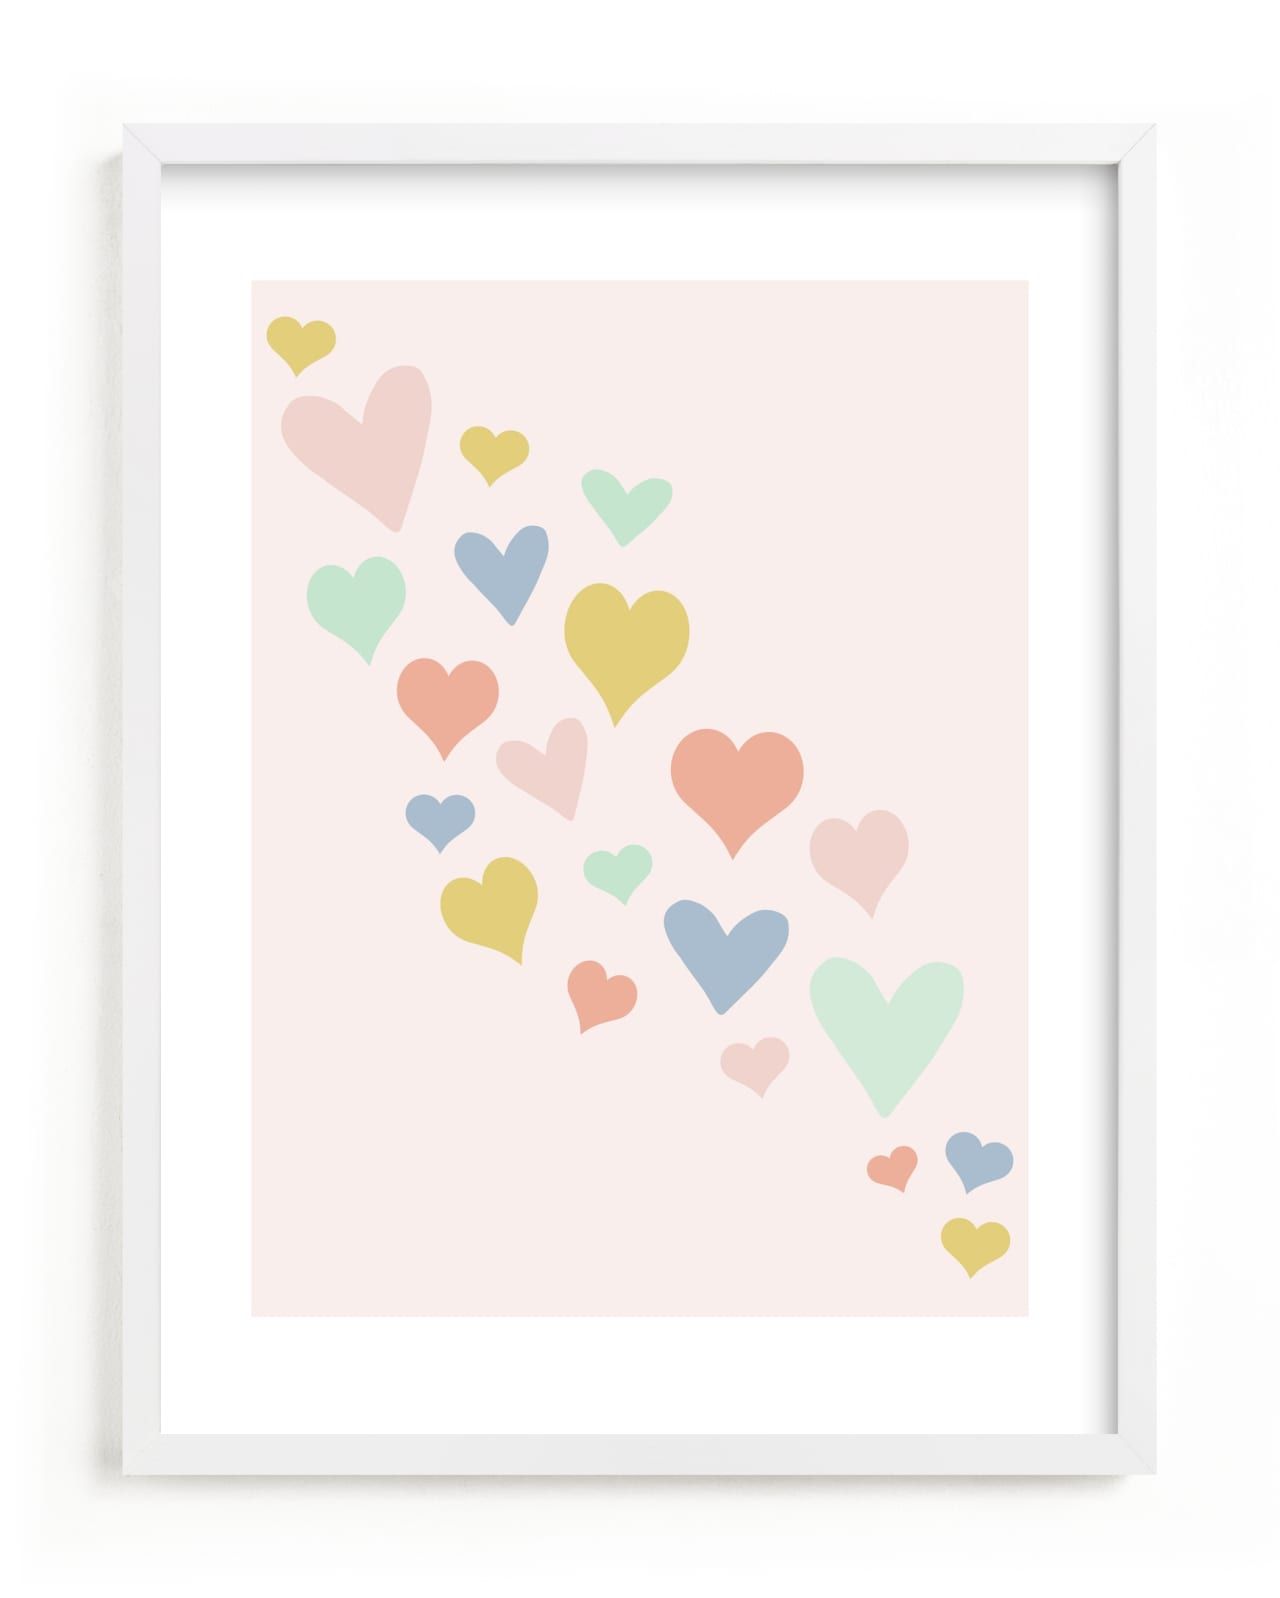 "wave of love" - Graphic Limited Edition Art Print by Kasia Labocki. | Minted